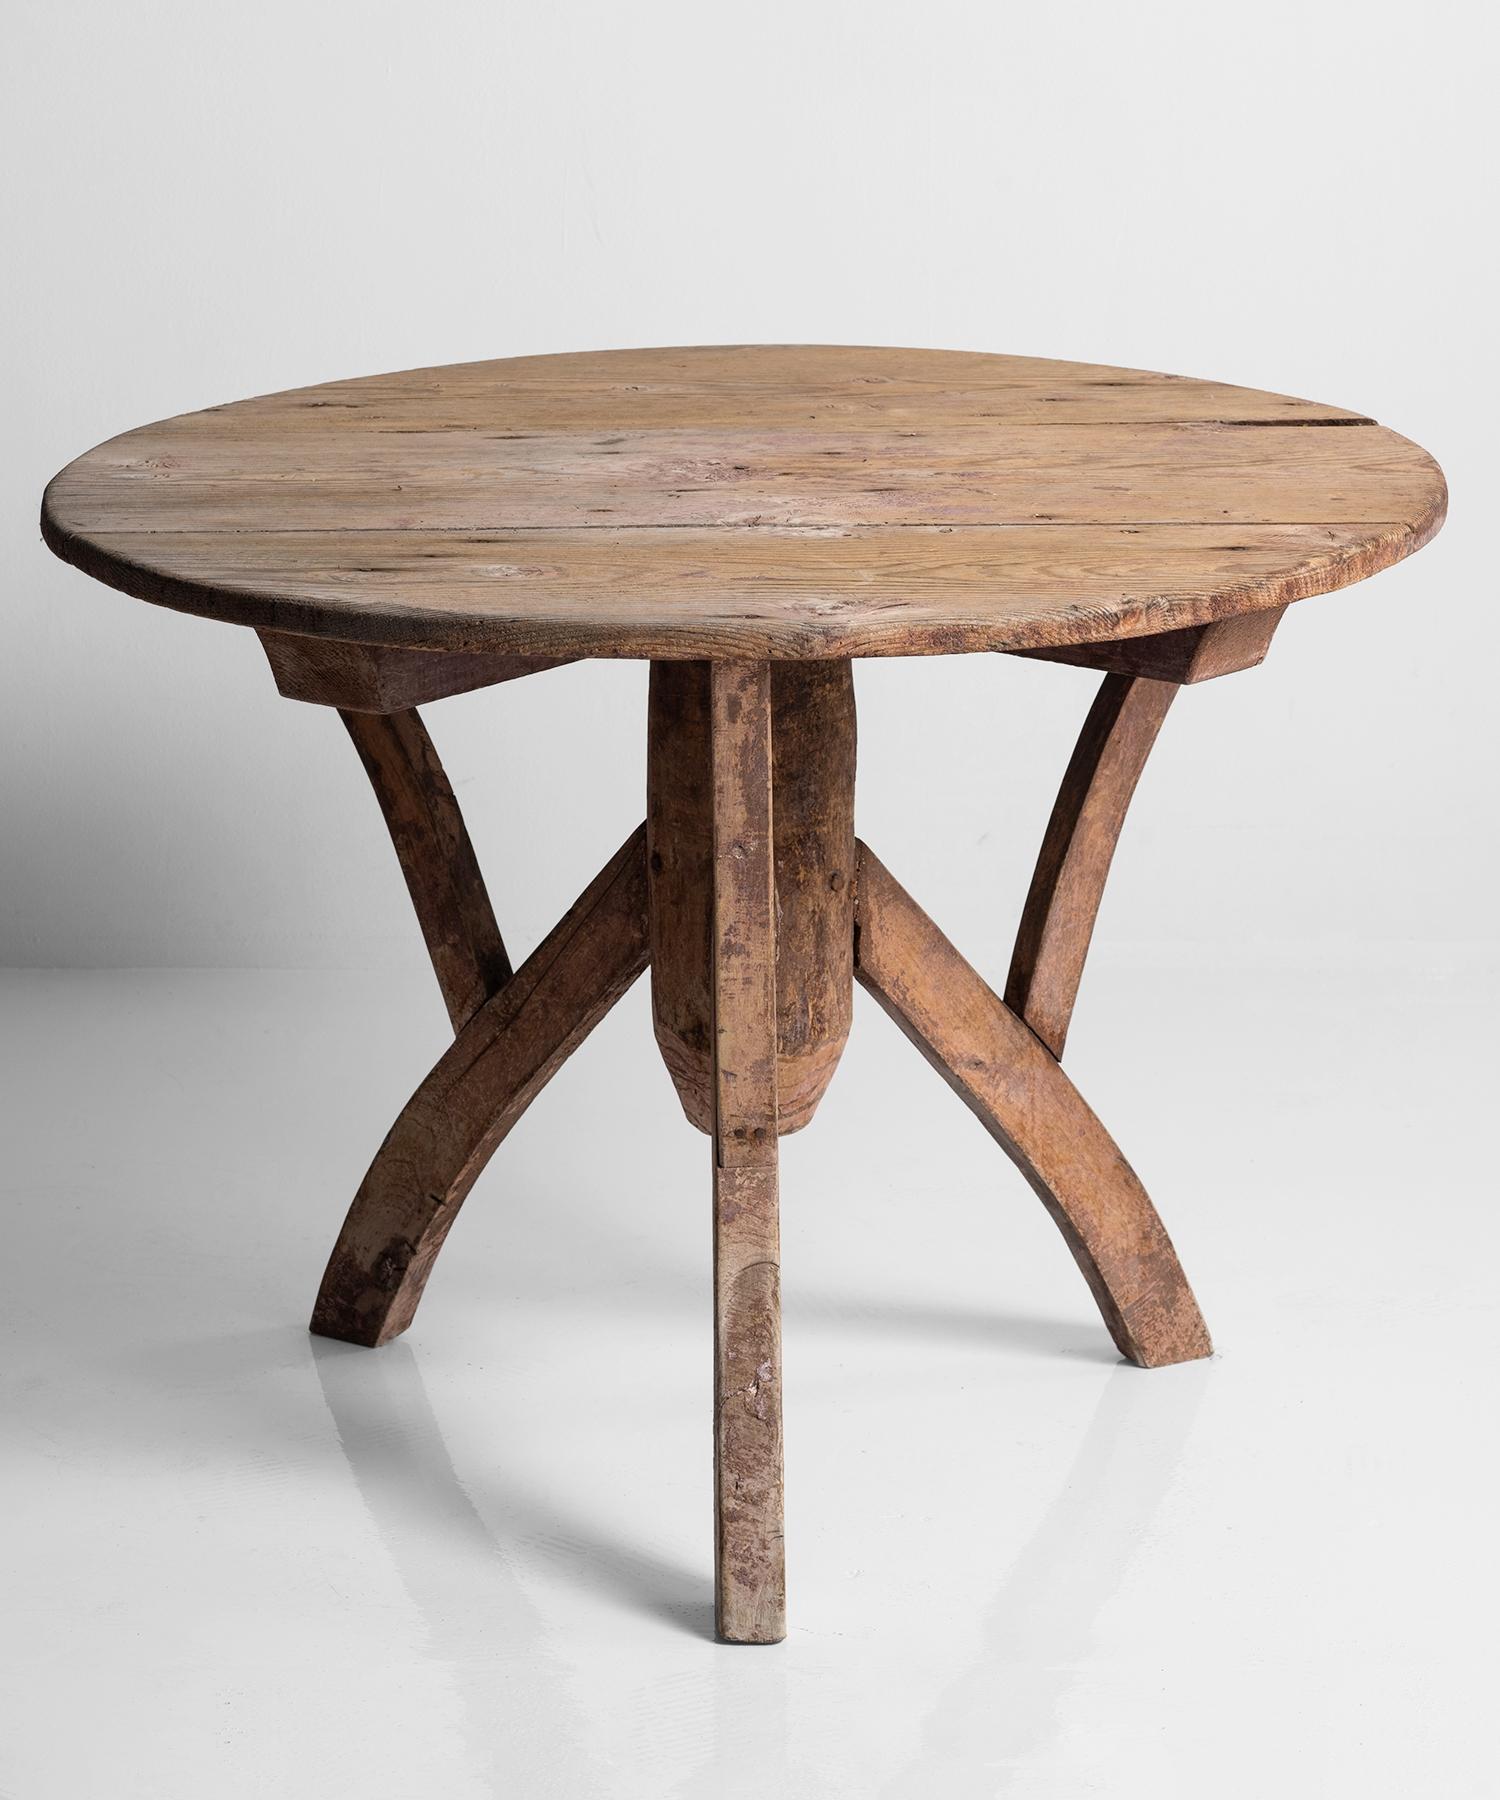 Pine centre table England, 19th century.

Unique form with beautiful patina.